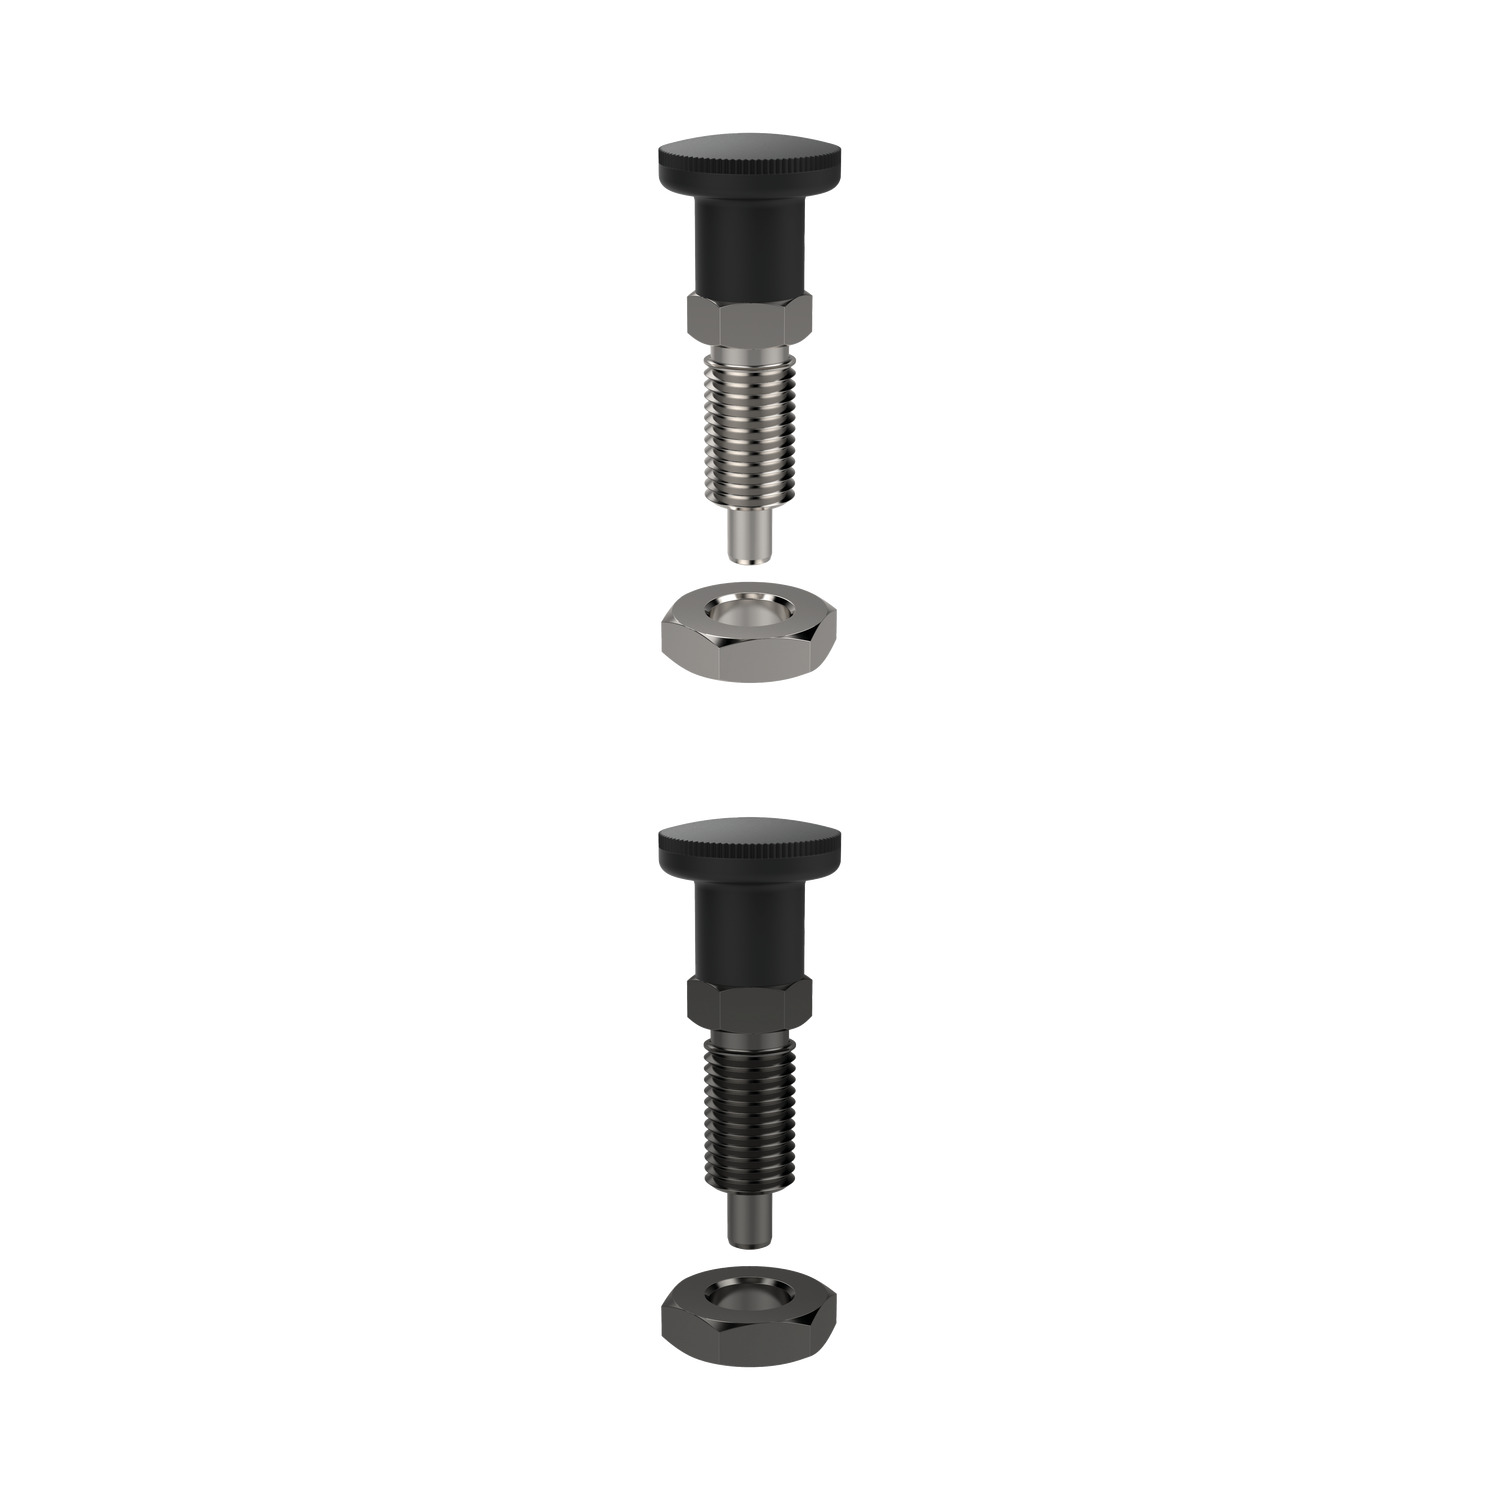 Product 32680, Index Plungers - Pull Grip compact - non-locking / 